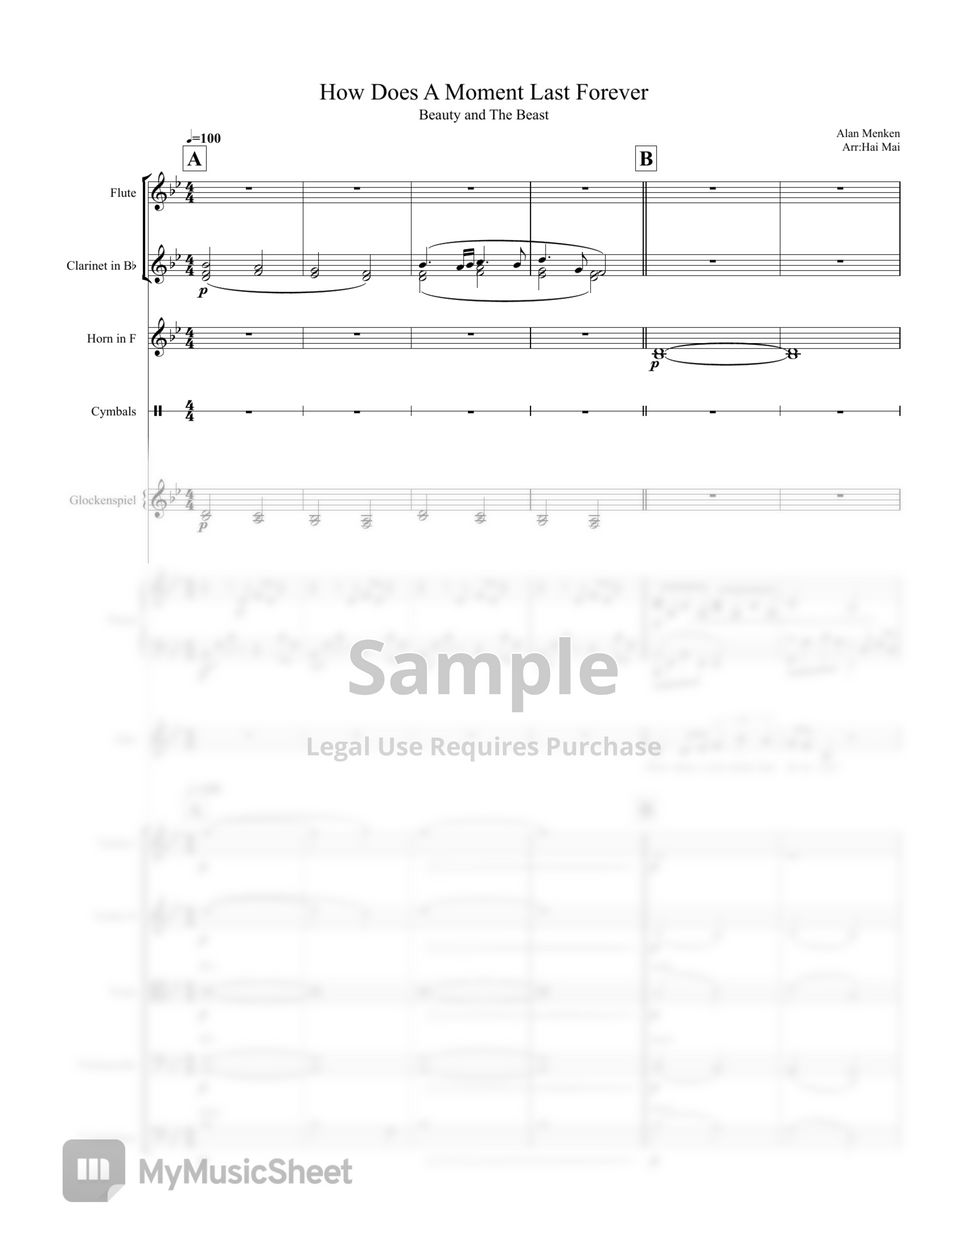 Alan Menken - How Does A Moment Last Forever for Singer and Orchestra - Score and Part by Hai Mai